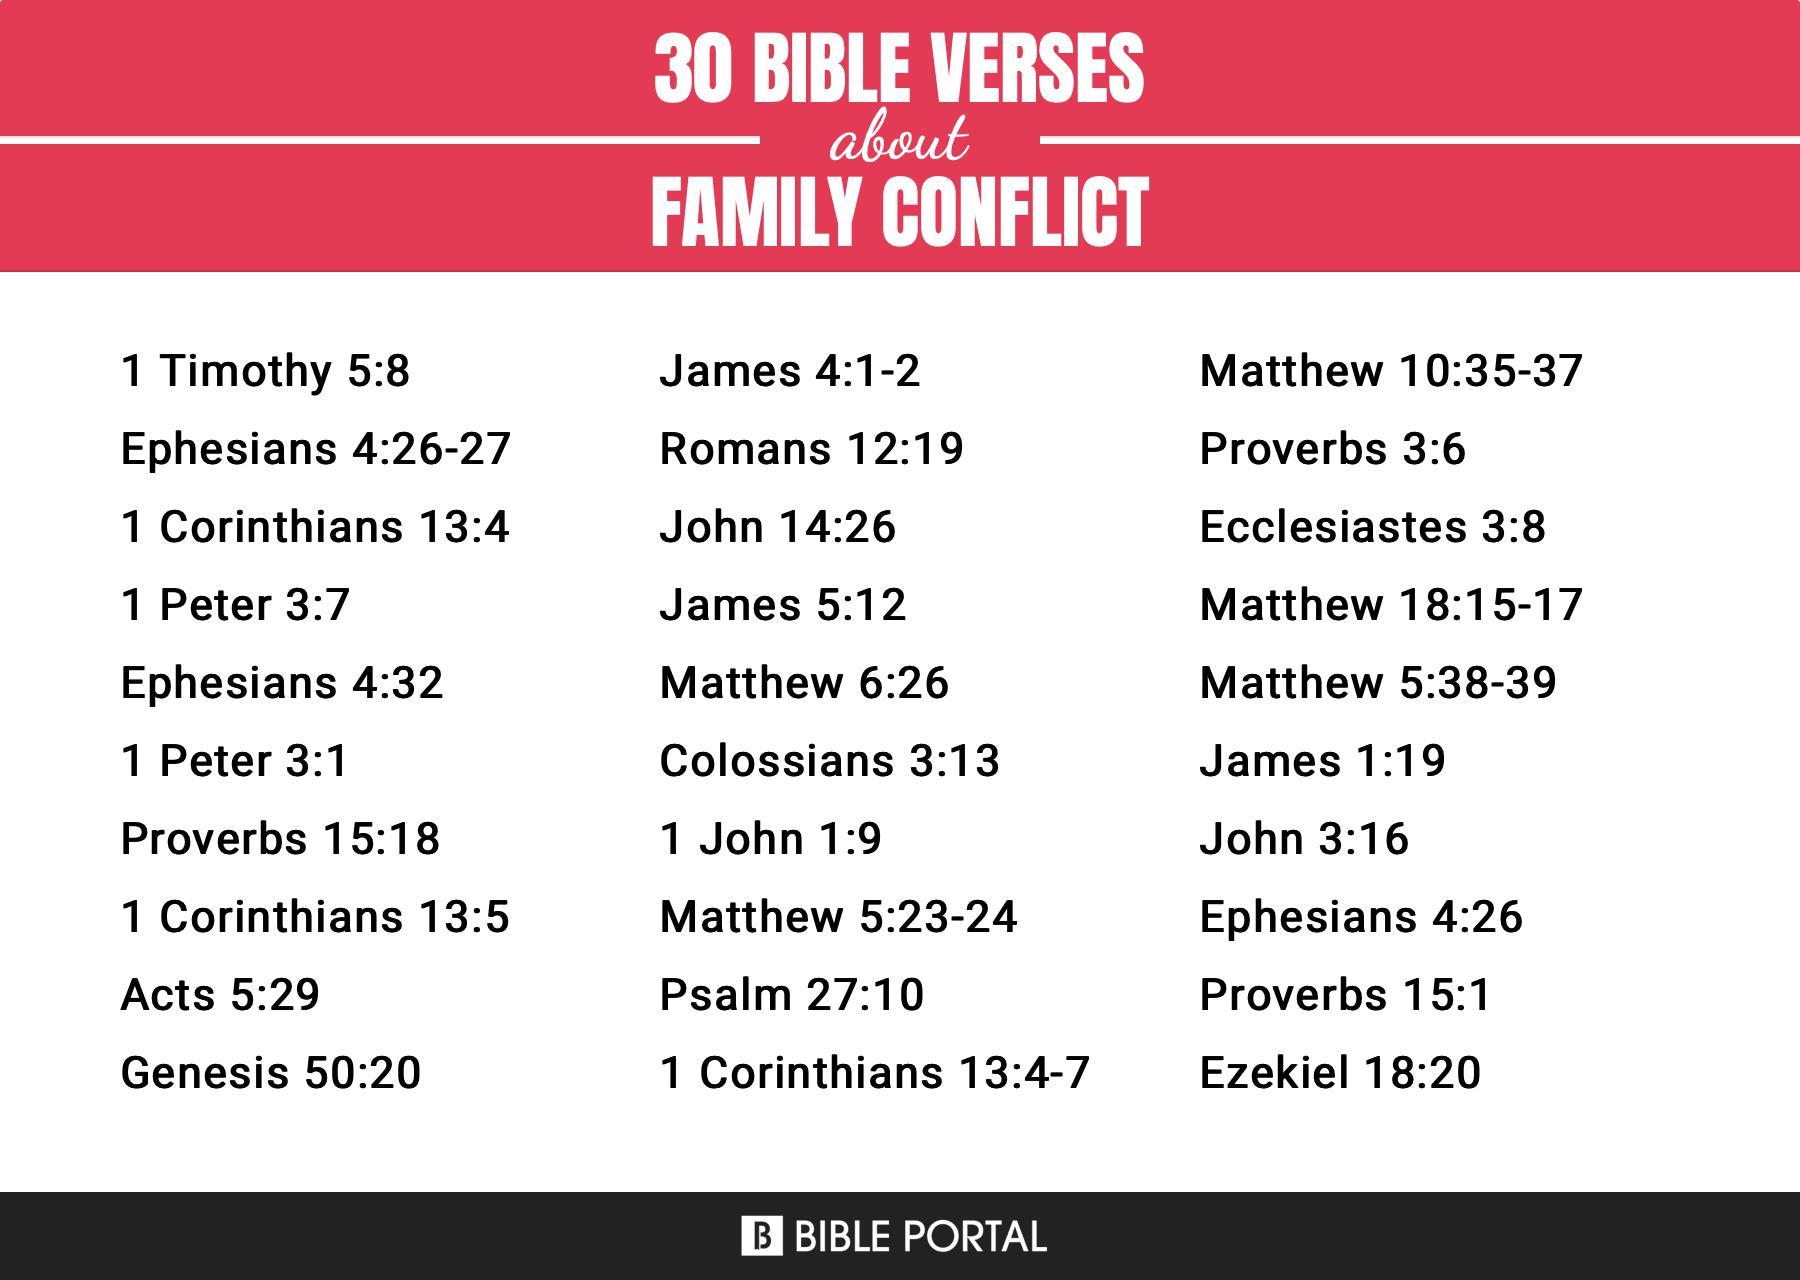 What Does the Bible Say about Family Conflict?